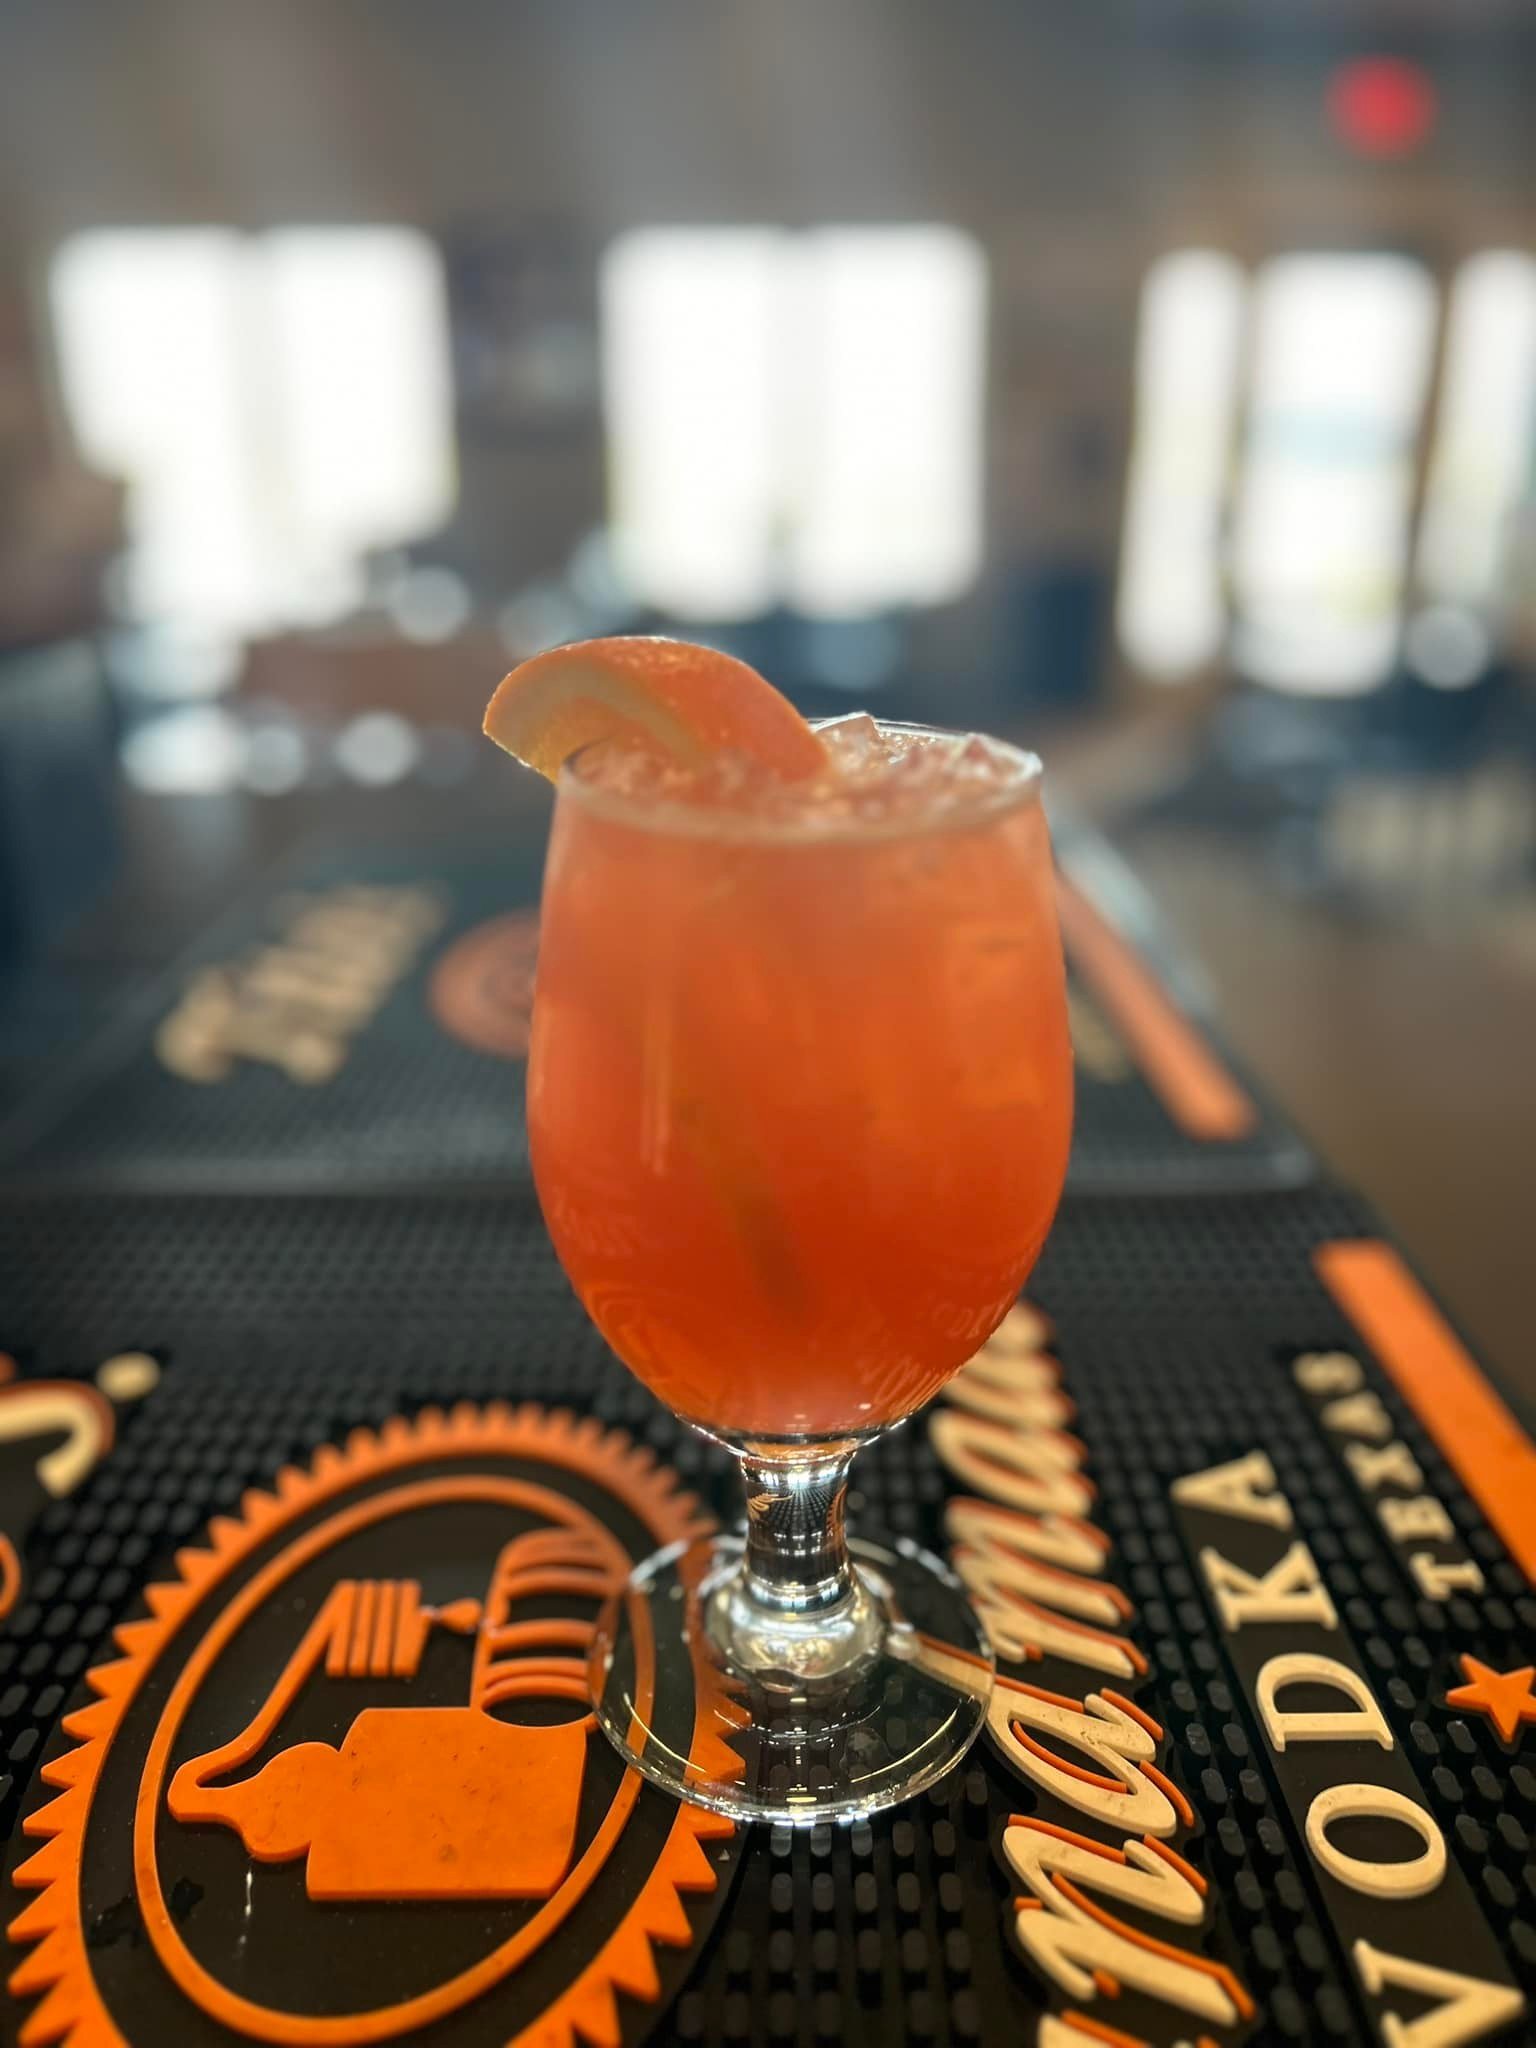 ✨S&bull;I&bull;X&bull;T&bull;Y✨ NUMBERS to $1000 💰JACKPOT💰‼️

Drink of the Day- Aperol Grapefruit Margarita $9

Our patio views are incredible- come see for yourself! 

Enjoy our NEW MENU selections- you&rsquo;ll be pleased! Promise! 

Bingo Starts